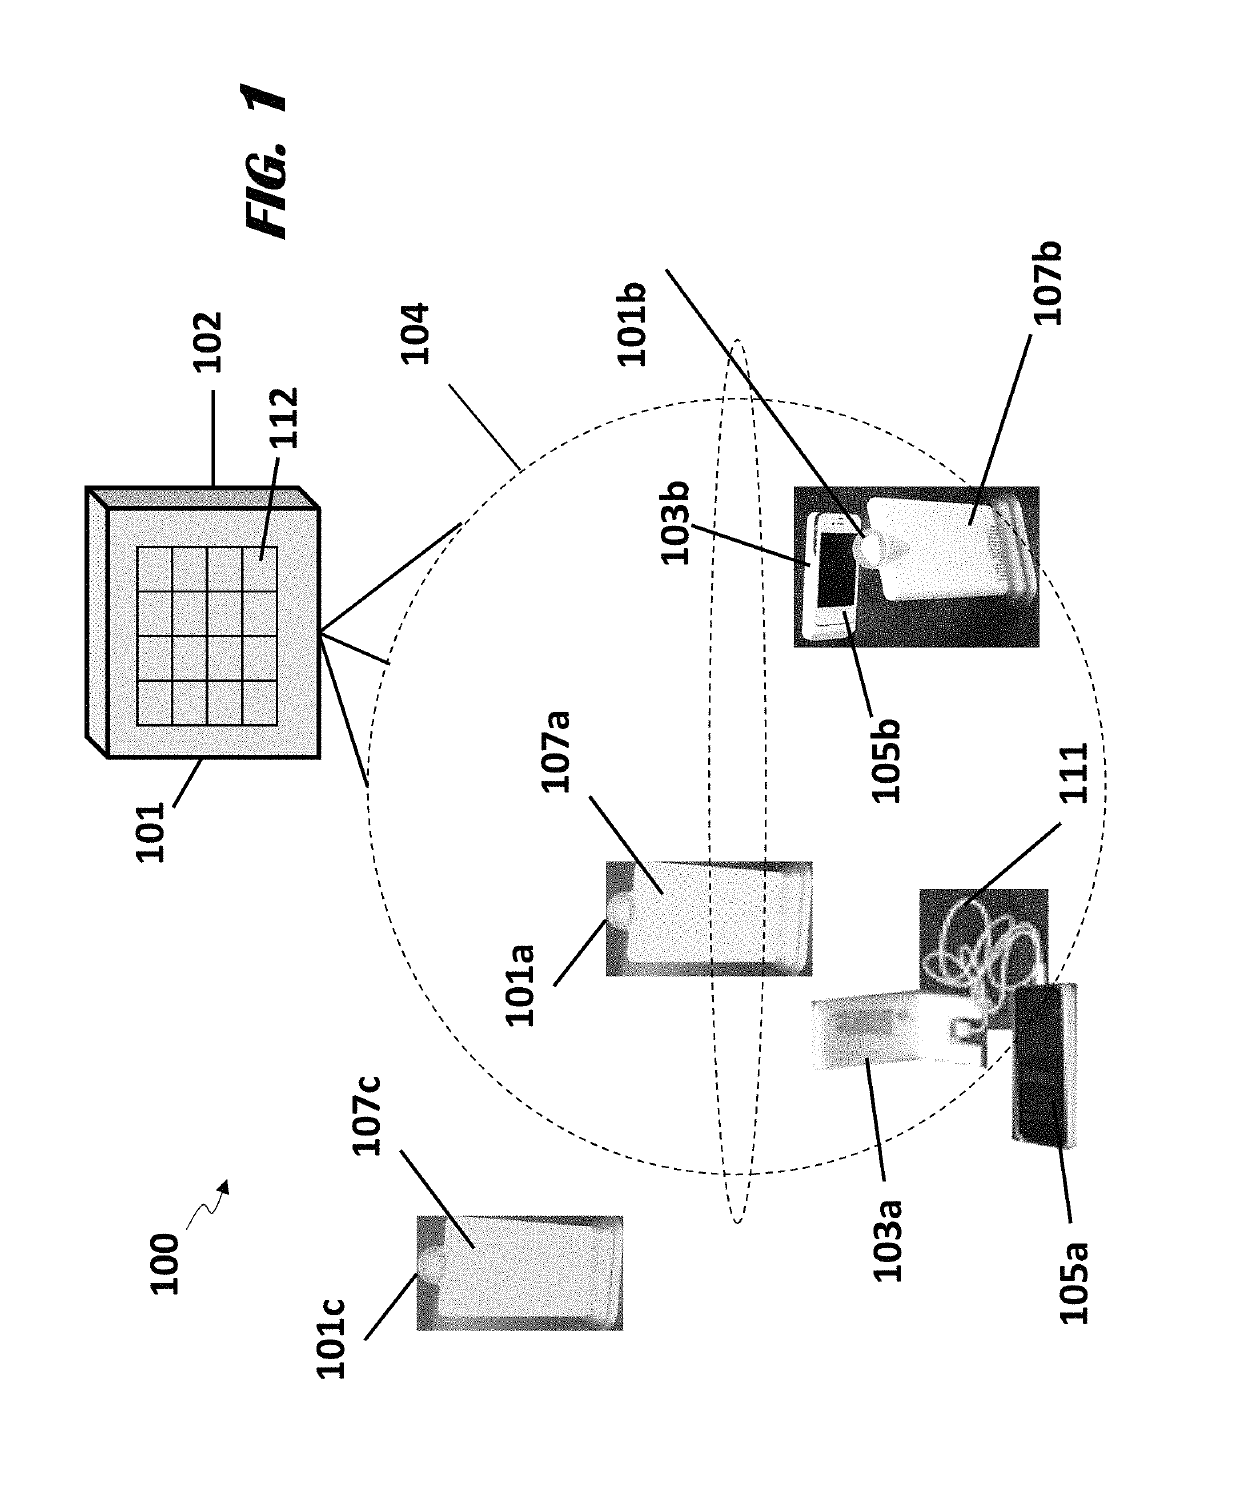 Multi-mode transmitter with an antenna array for delivering wireless power and providing Wi-Fi access